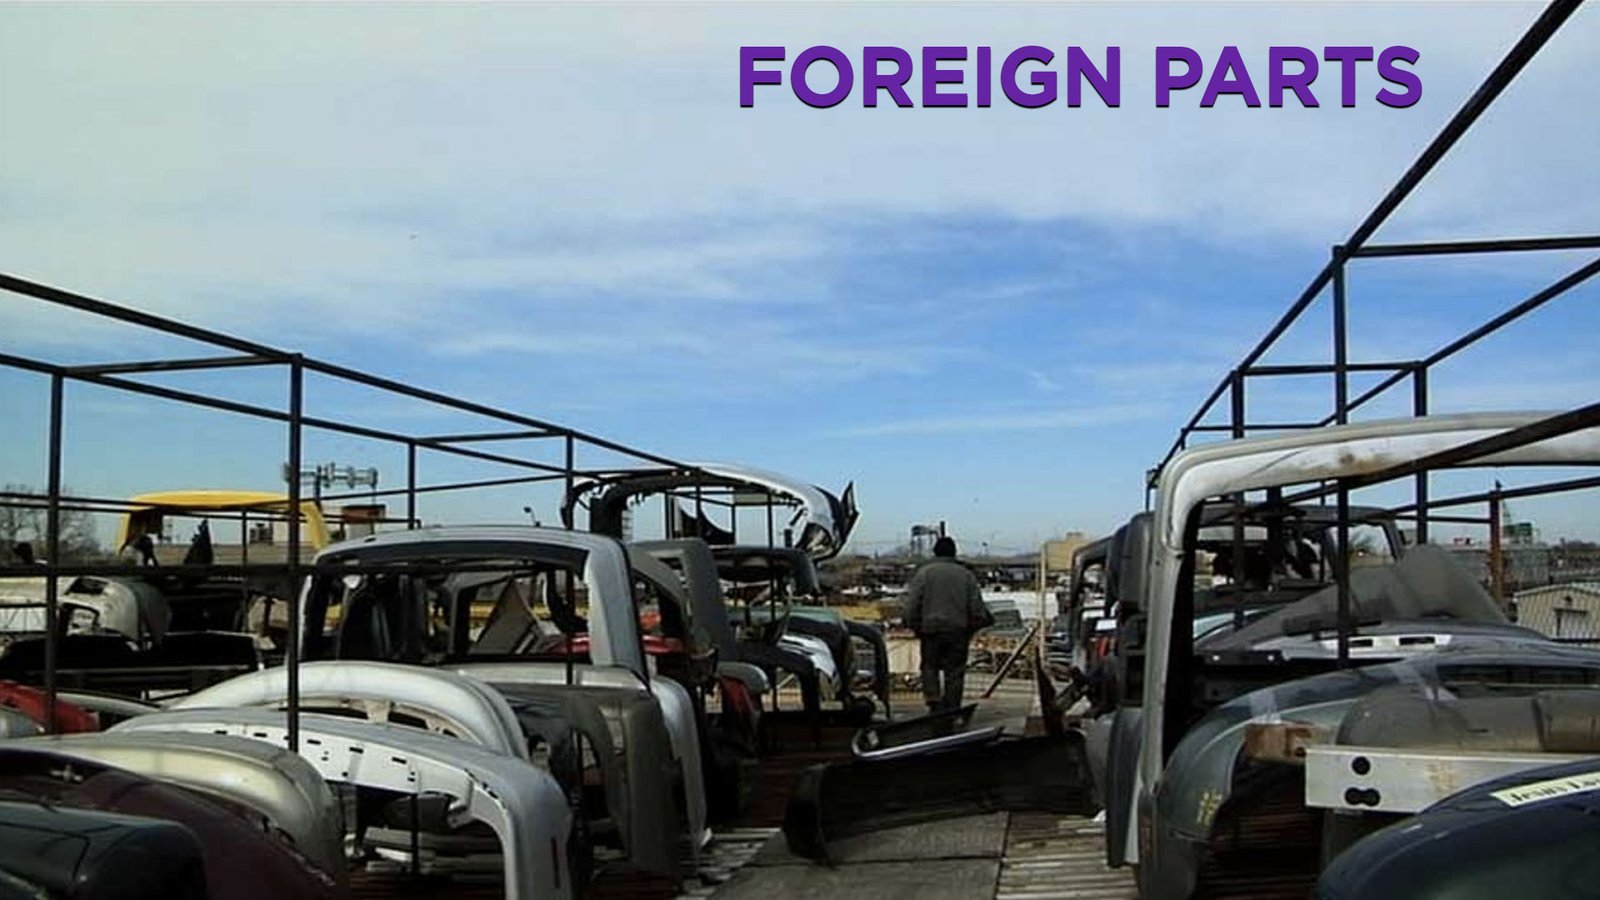 Foreign Parts